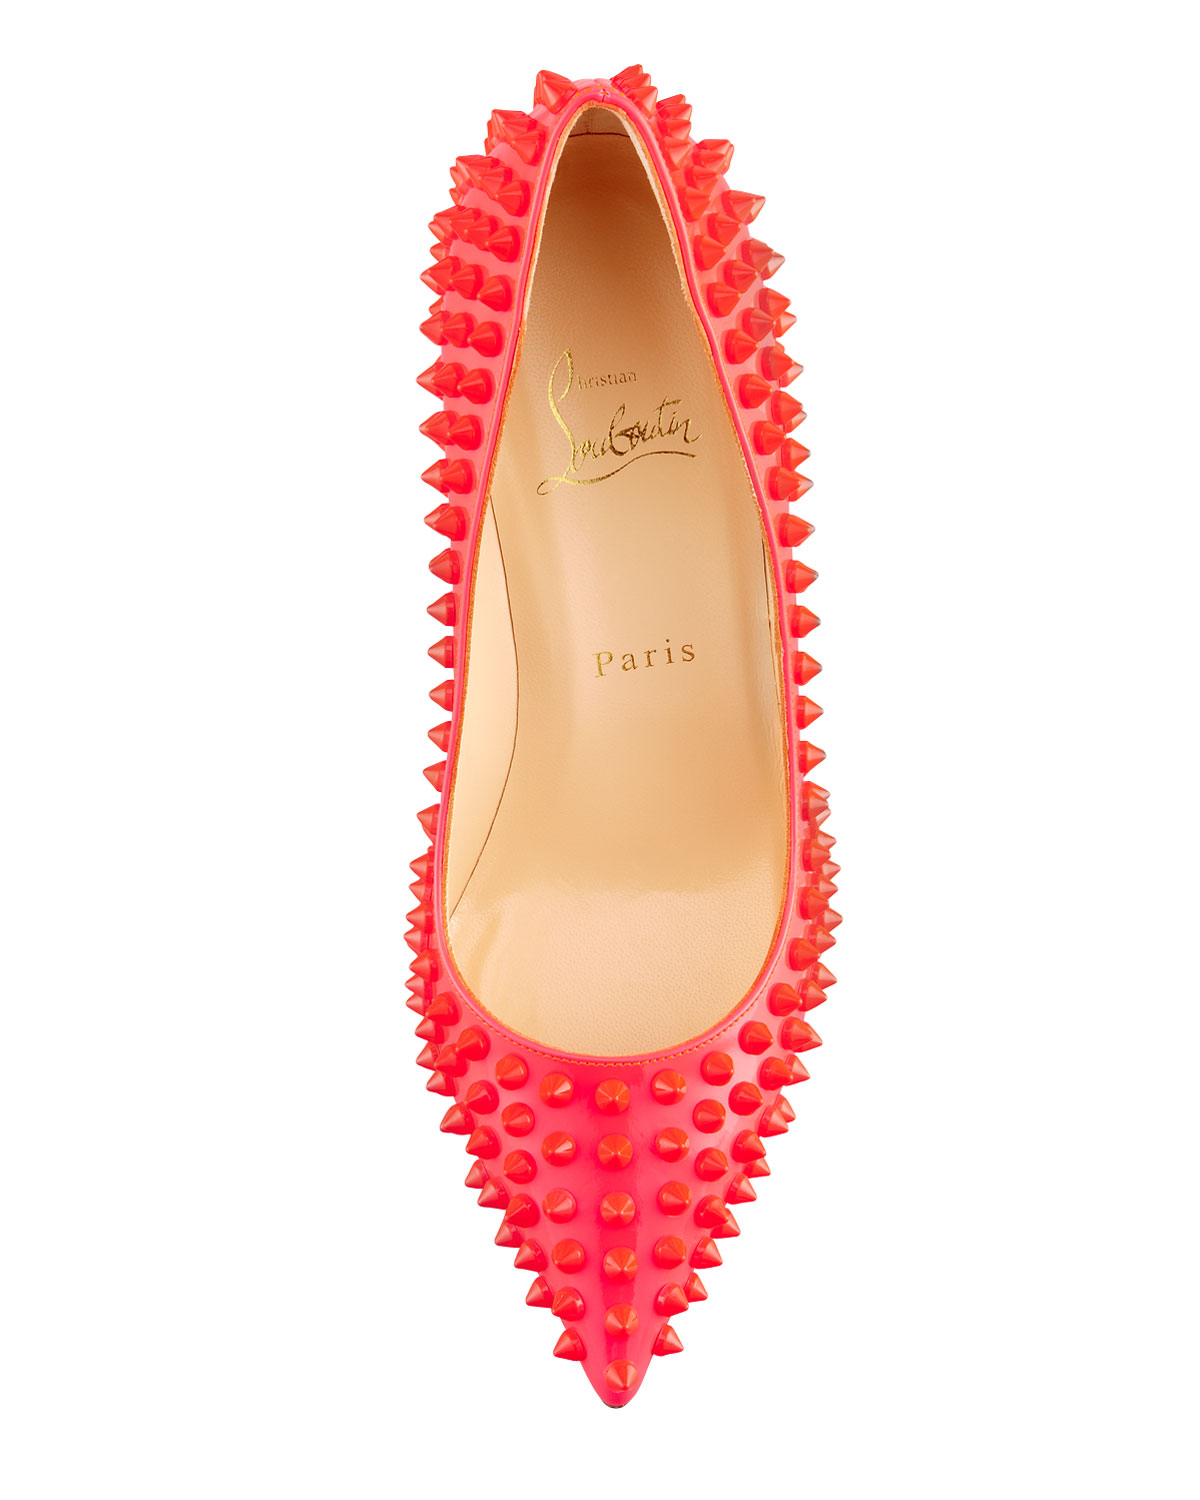 Christian louboutin Pigalle Spiked Pointedtoe Red Sole Pump Pink ...  